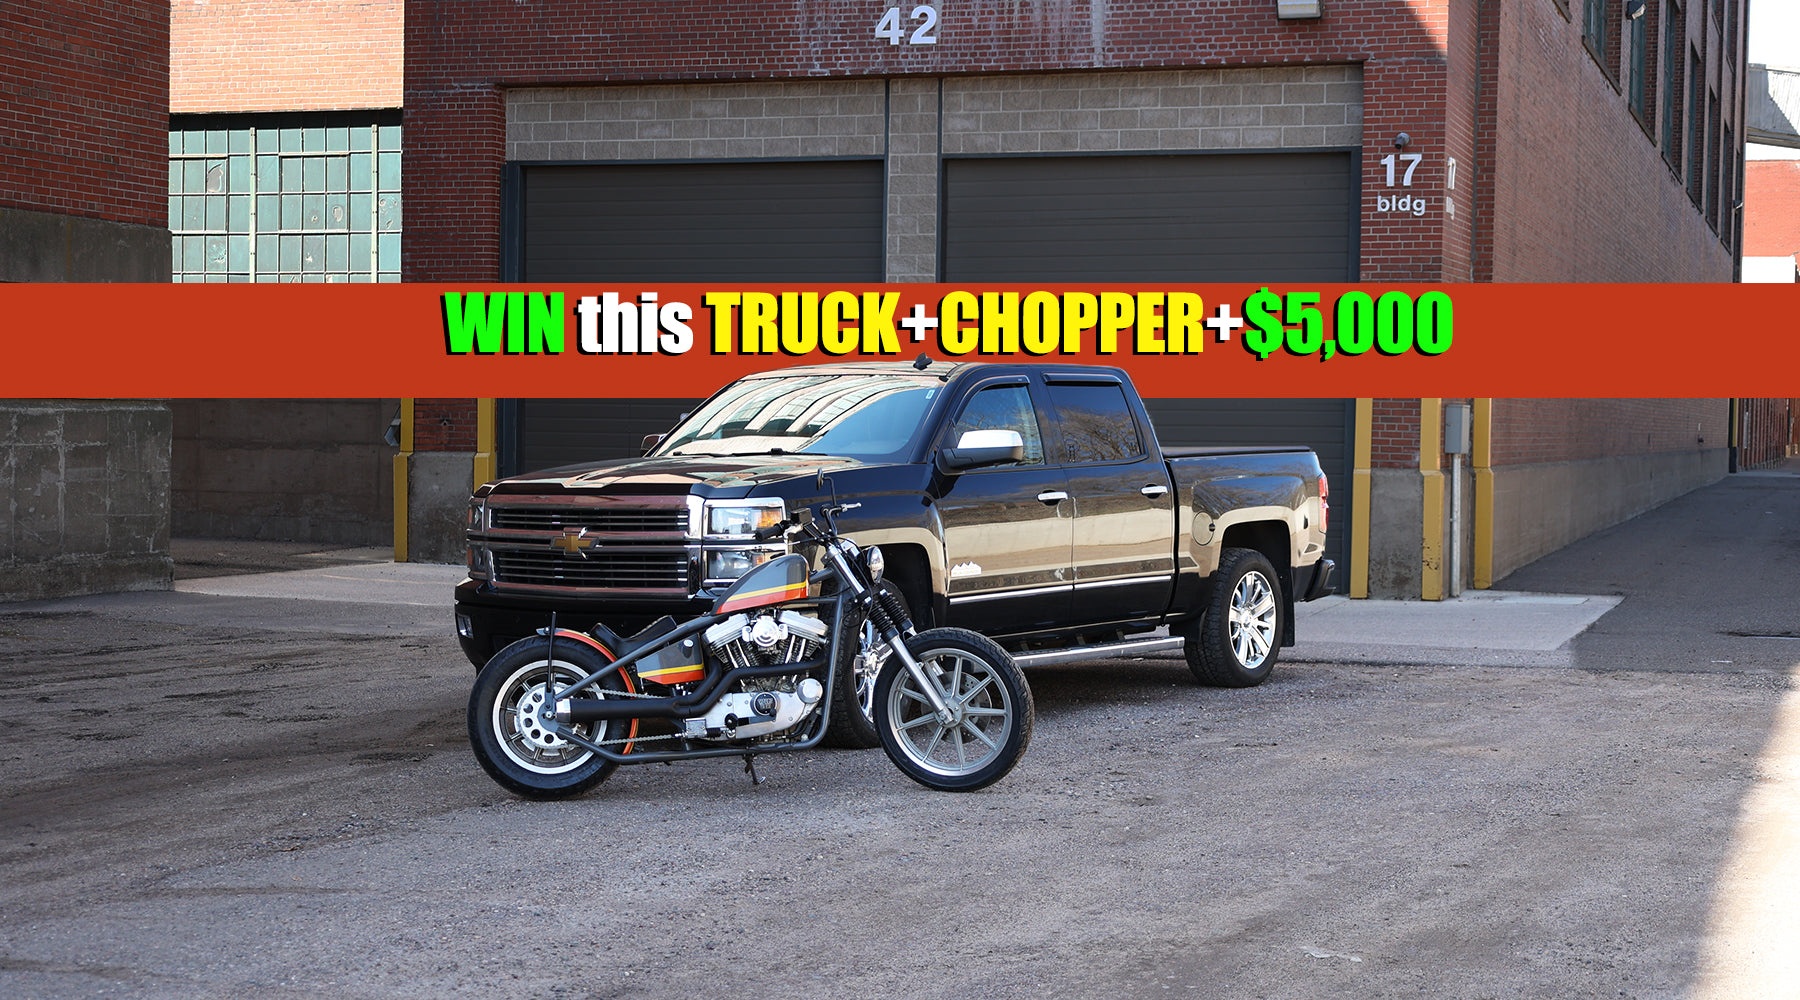 Win a truck and chopper in front of a brick building